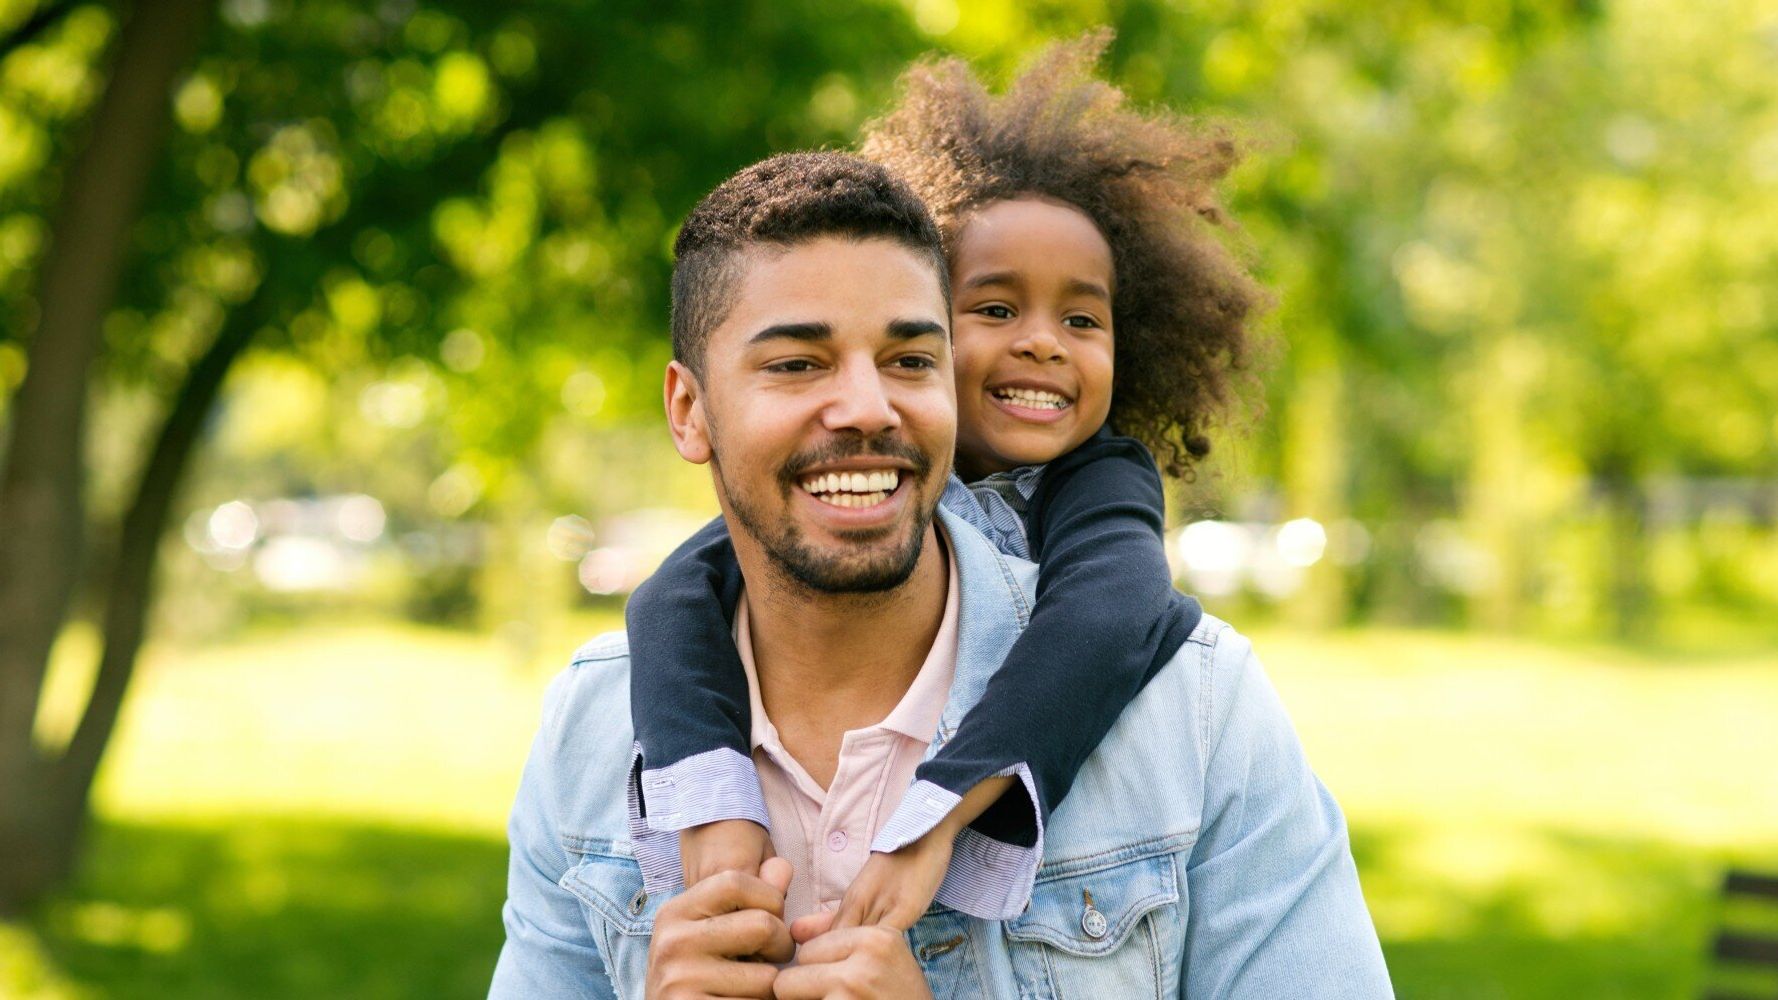 Single Dads Like Me Don't Have To Go It Alone | HuffPost UK Parents